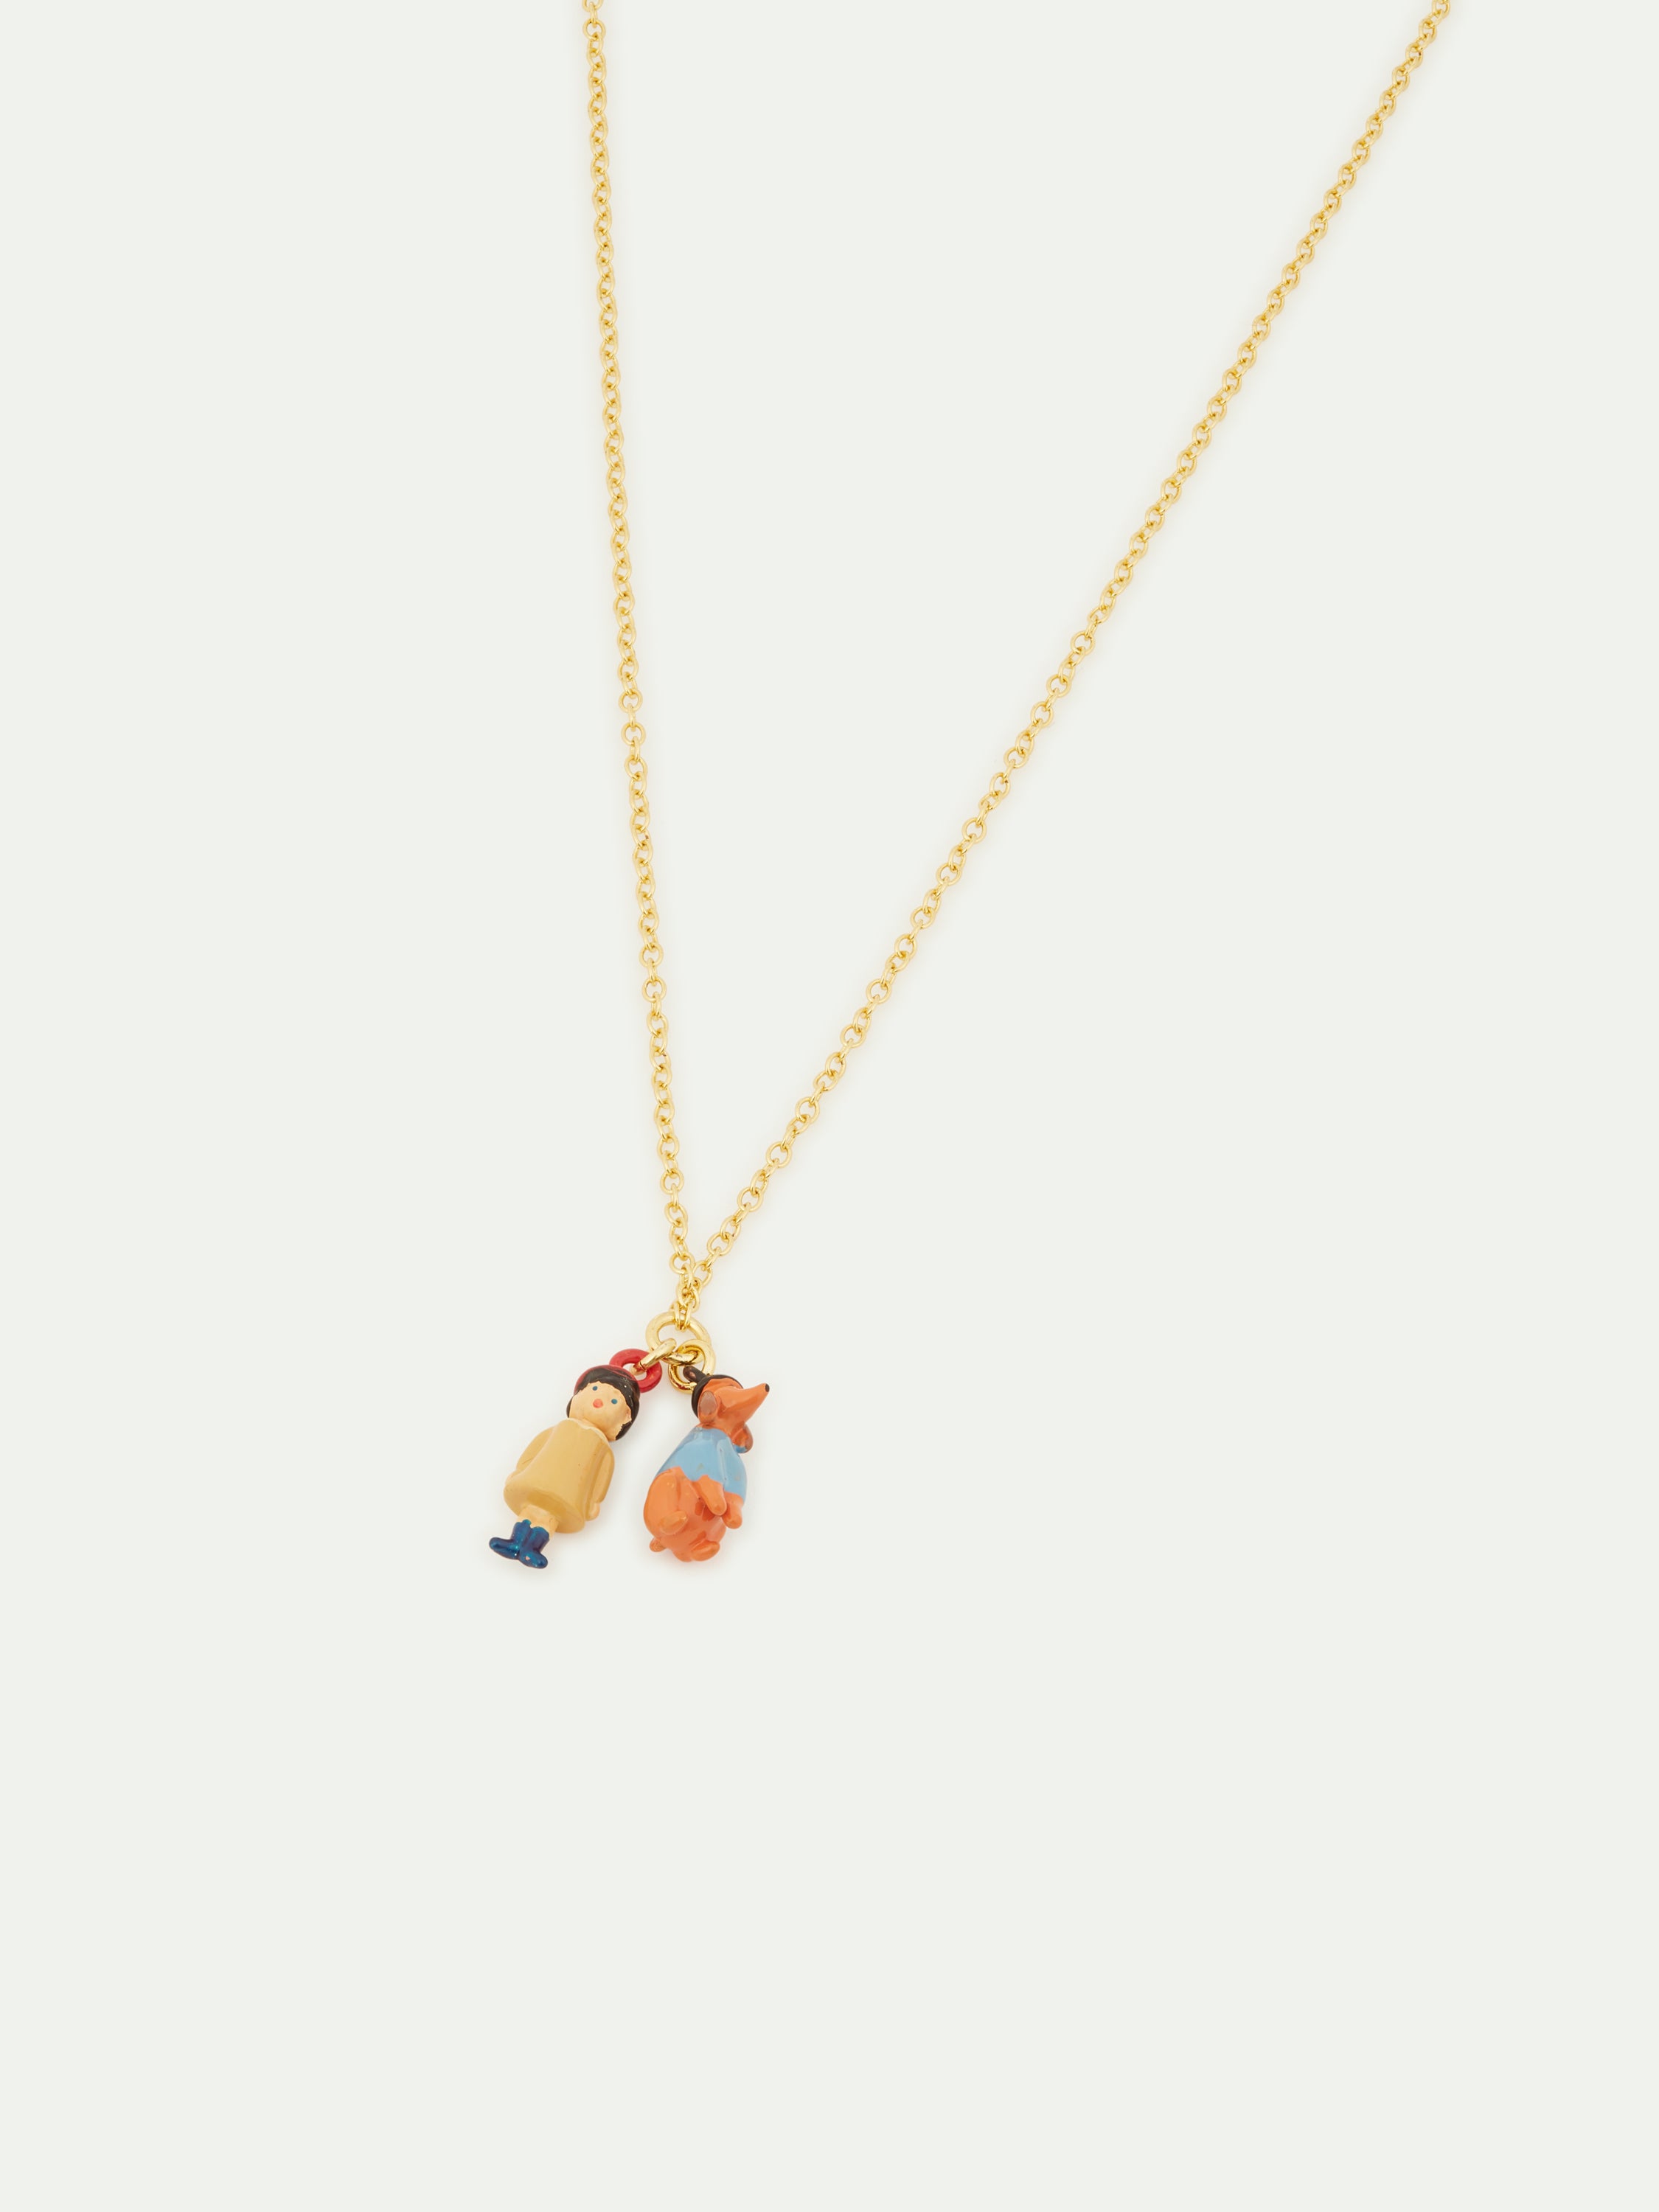 Little girl and dachshund pendant necklace